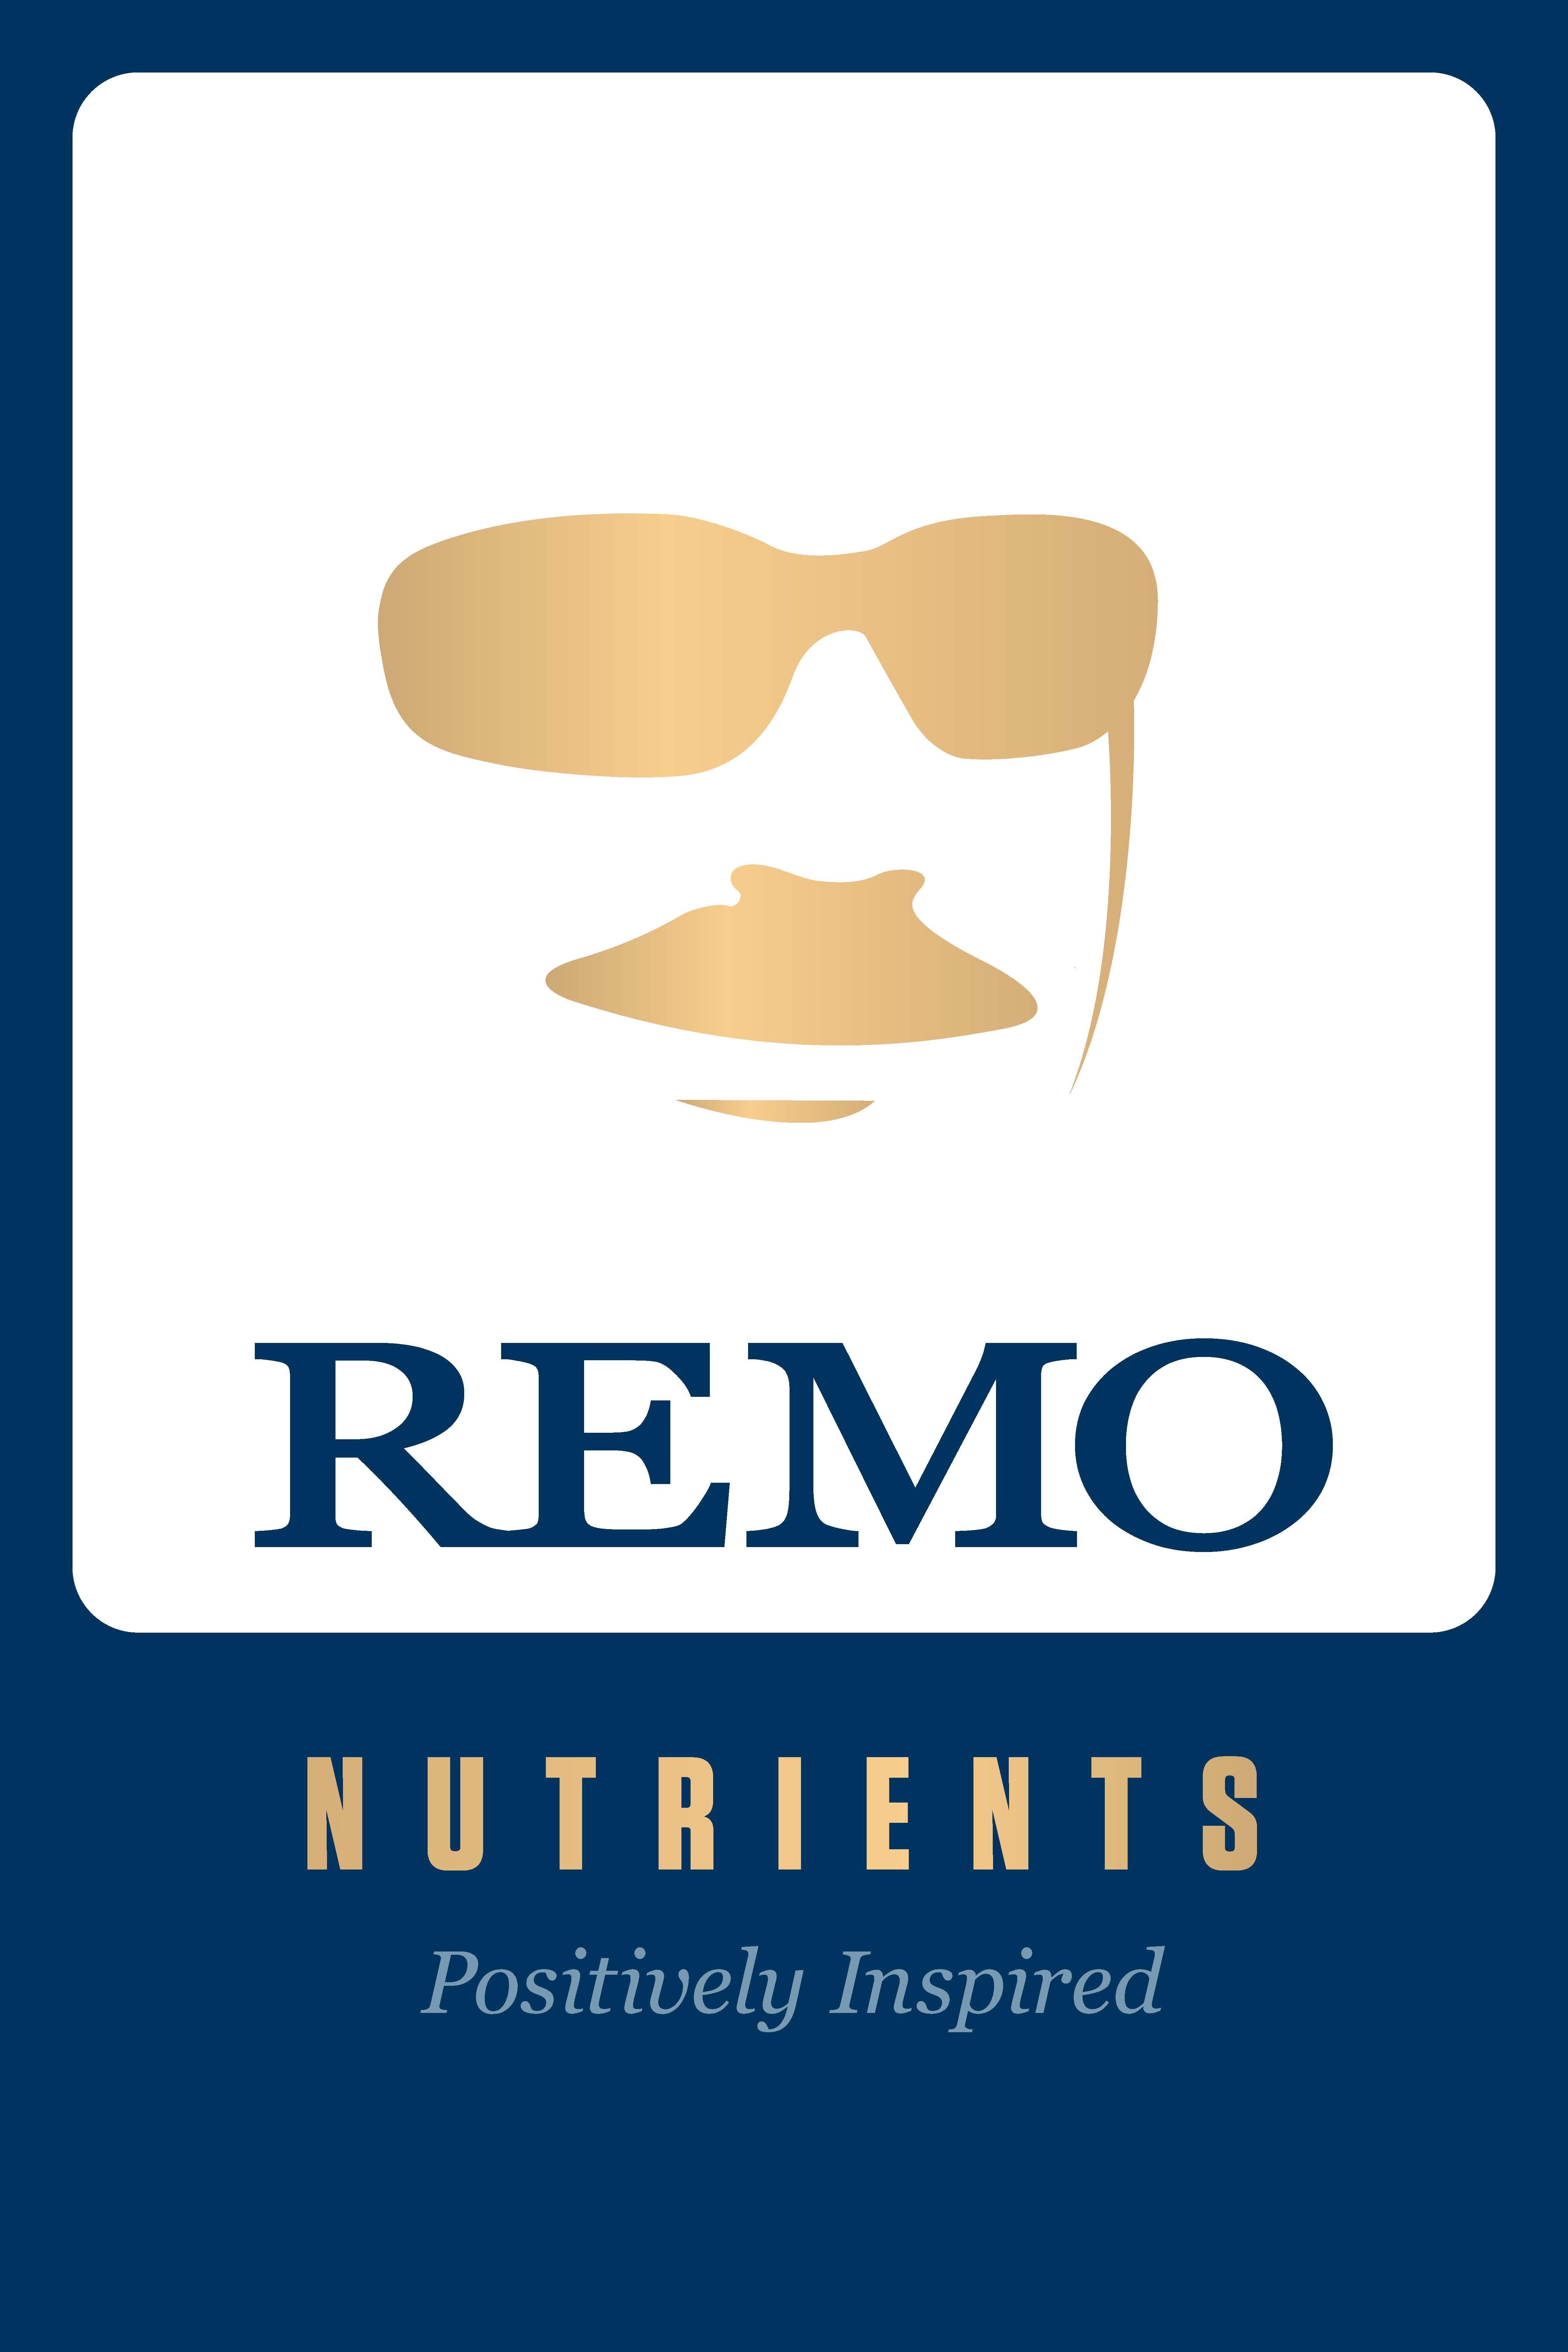 Nutrient Logo - Remo Nutrients Product Images - Easy Grow Ltd